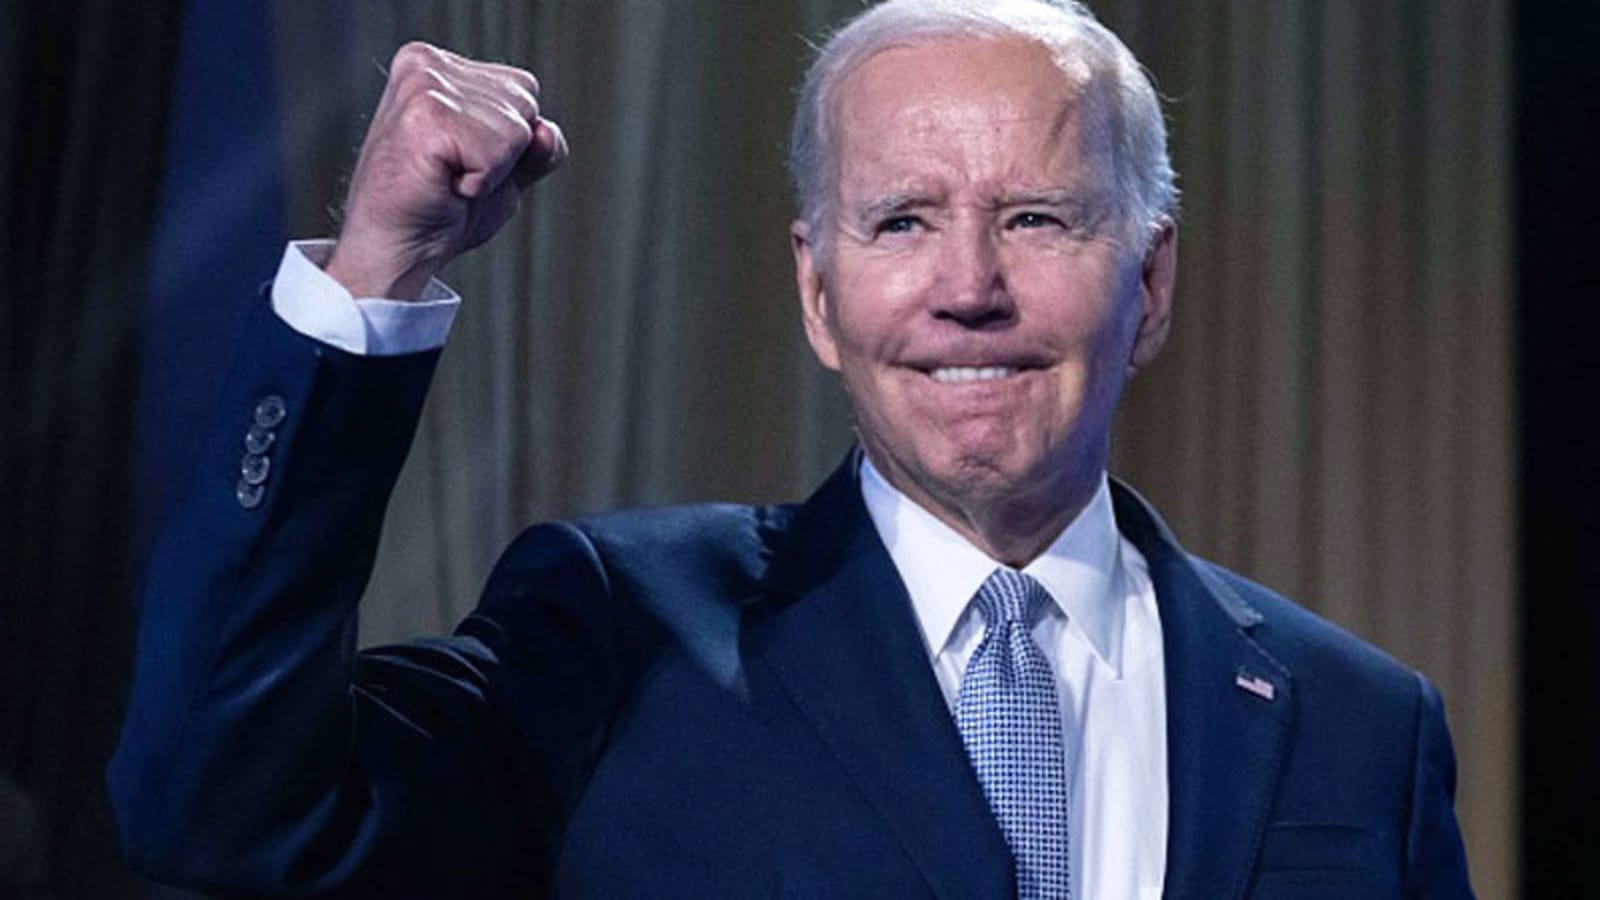 Survey Shows Declining Support for Biden Among Black Voters in Key Swing States